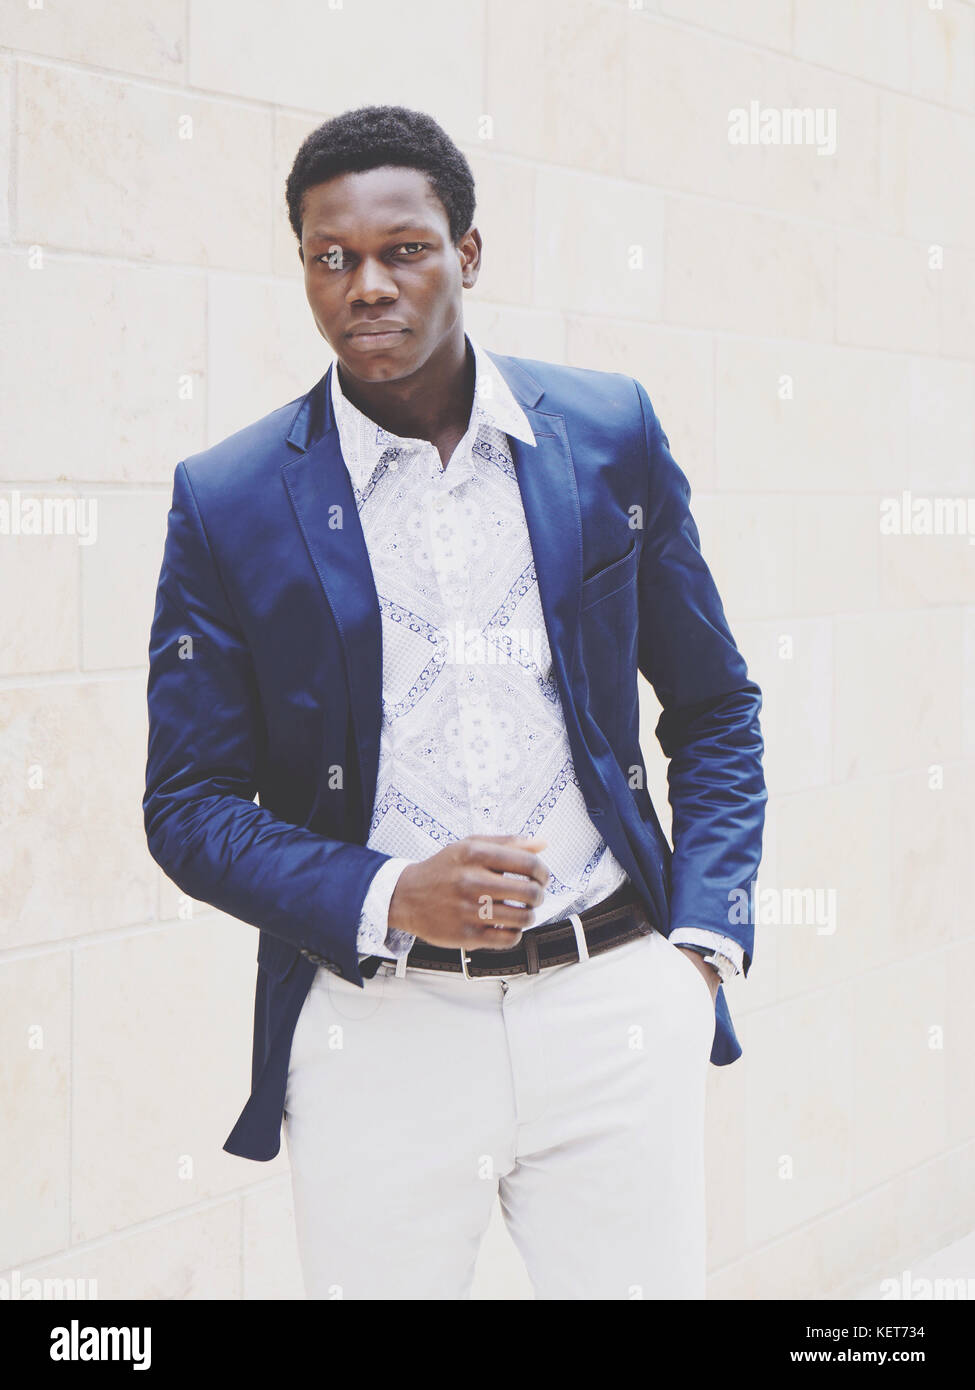 fashionable young man of african descent Stock Photo